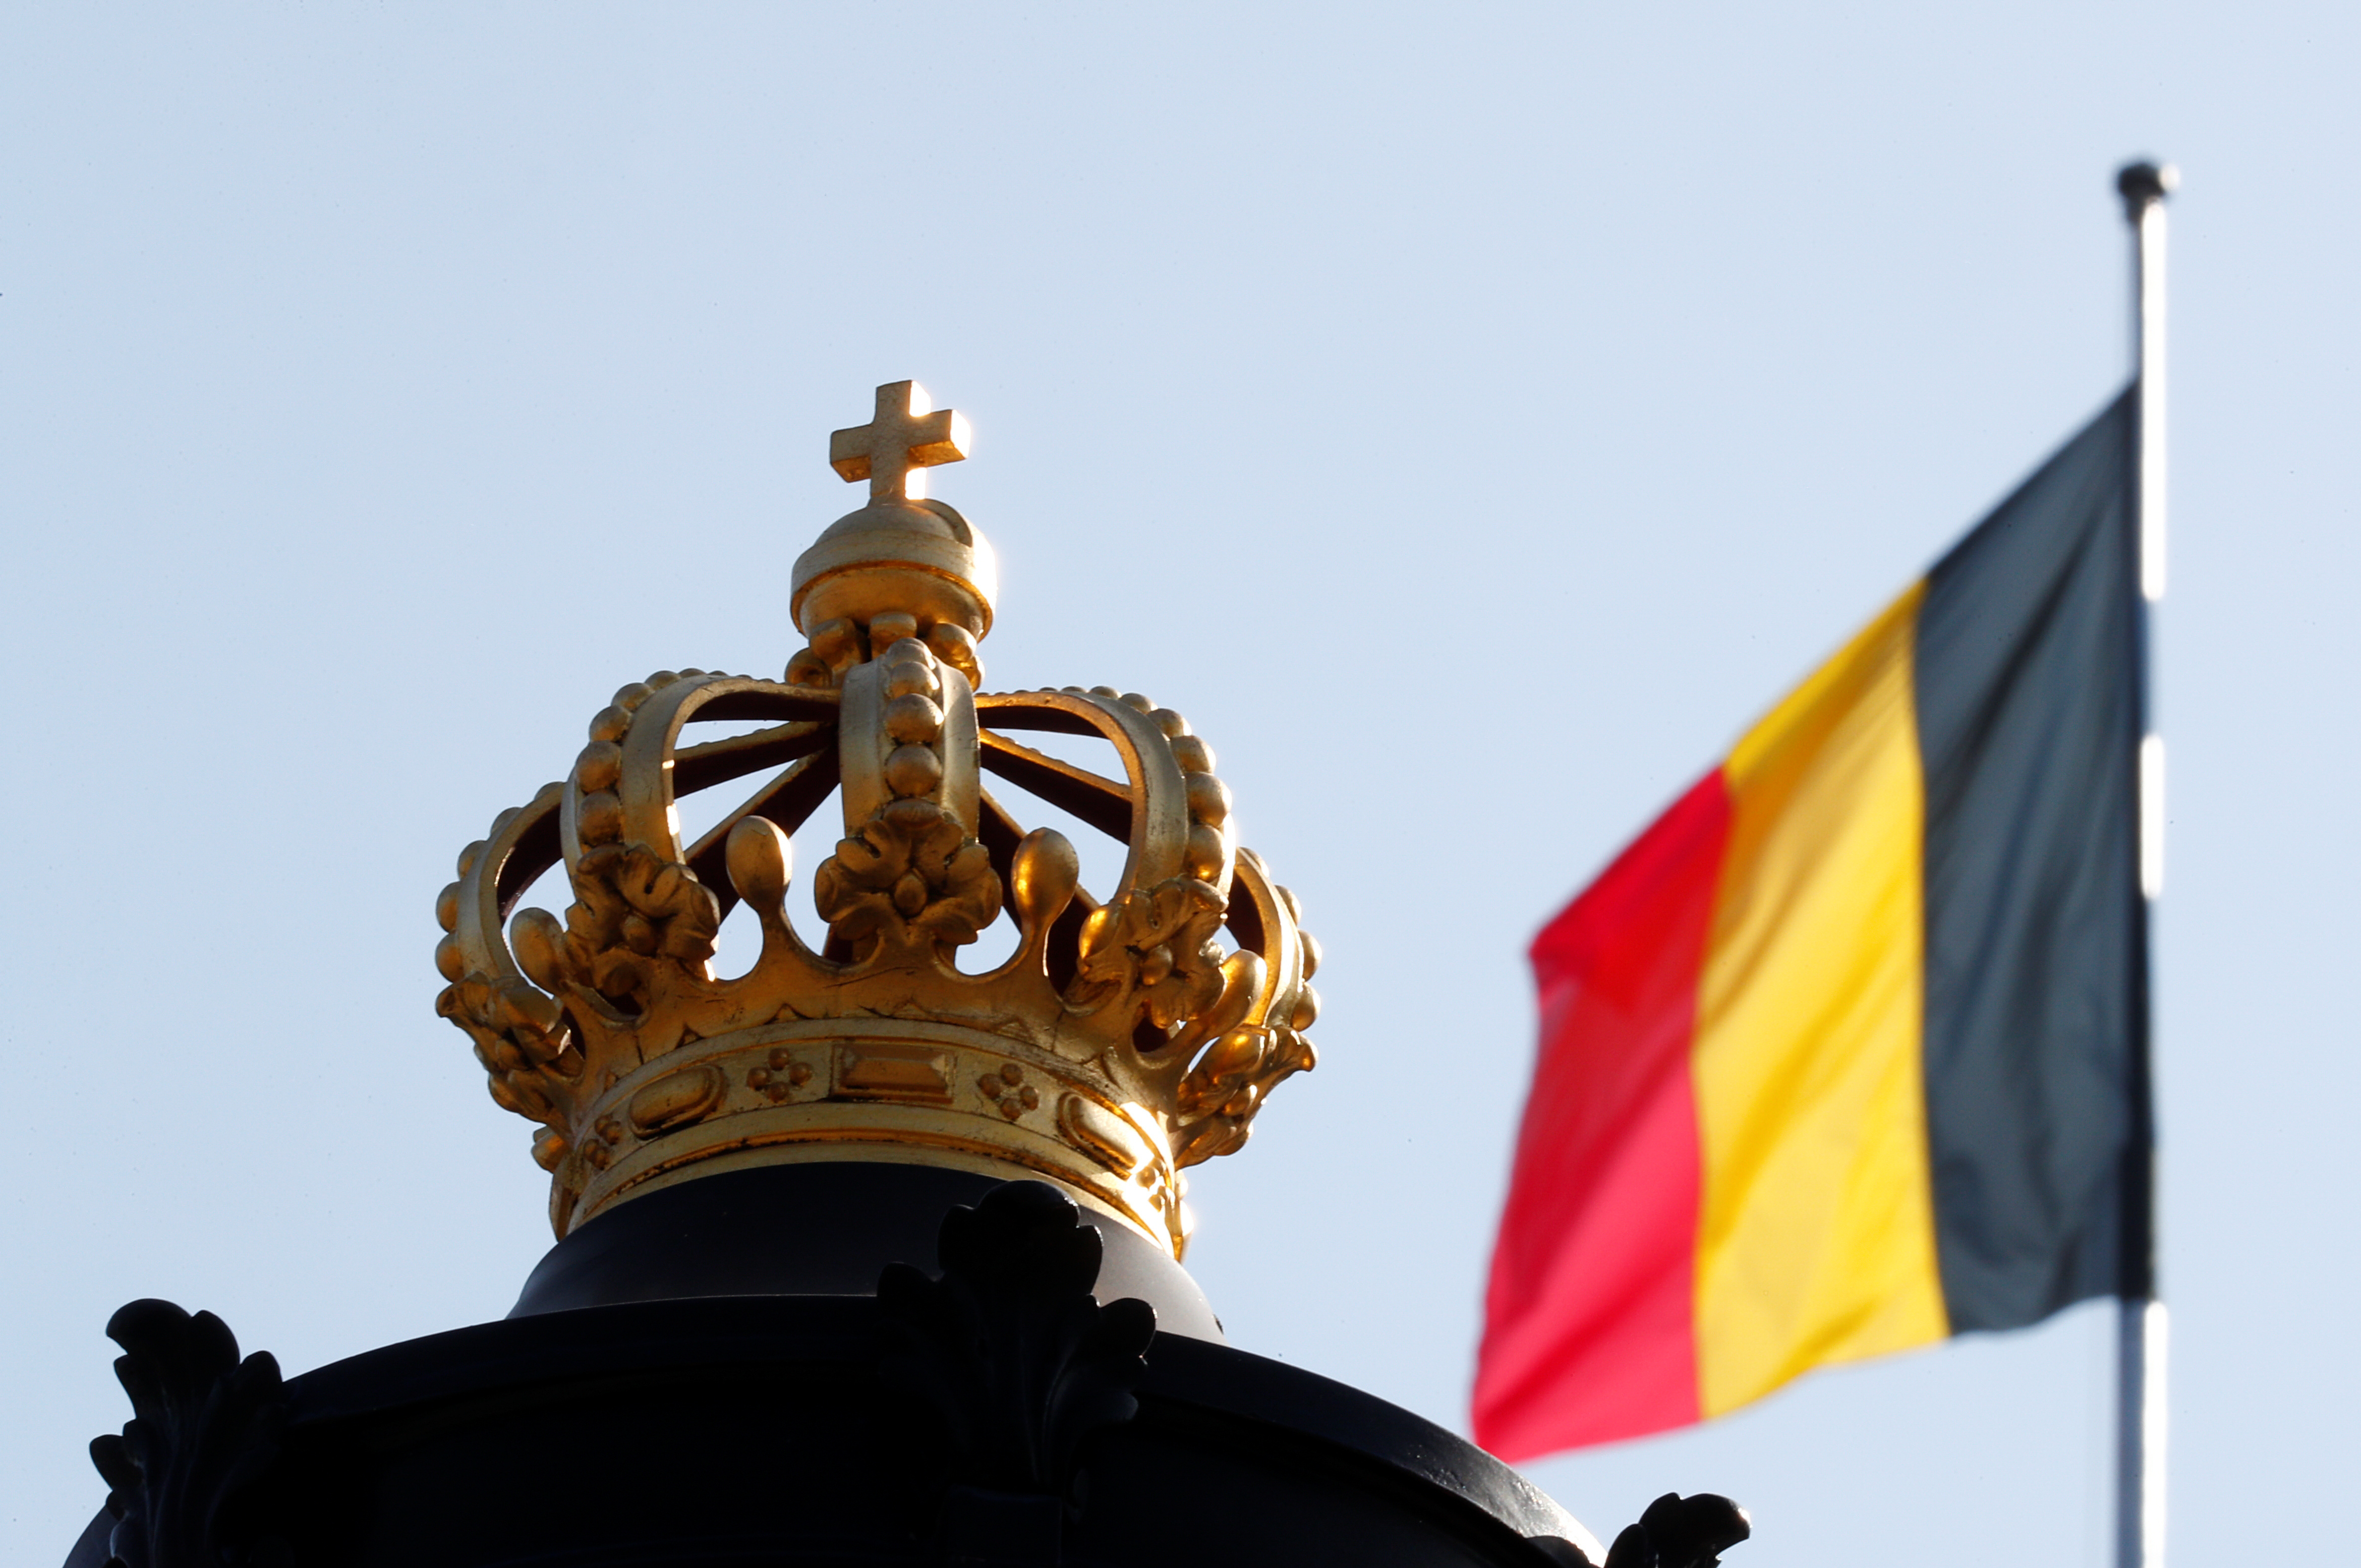 The Belgian flag is seen outside Brussels Royal Palace during negotiations to form a government, in Brussels